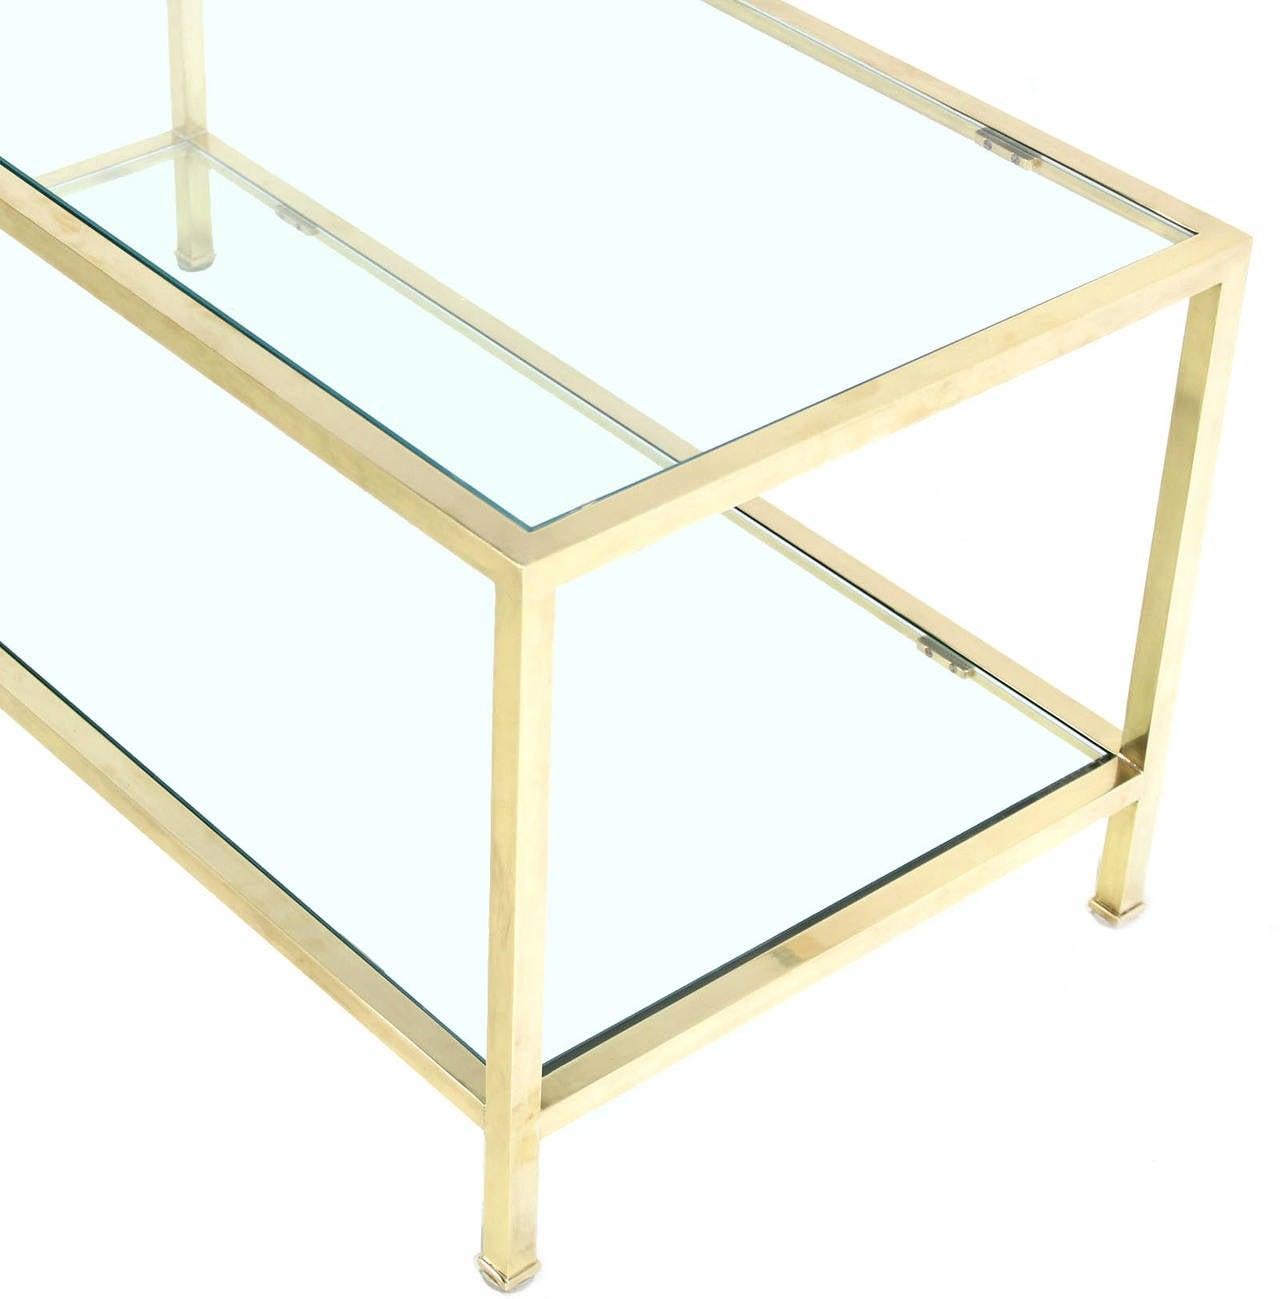 American Mid Century Modern Solid Polished Brass  Square Tube Rectangular Coffee Table For Sale